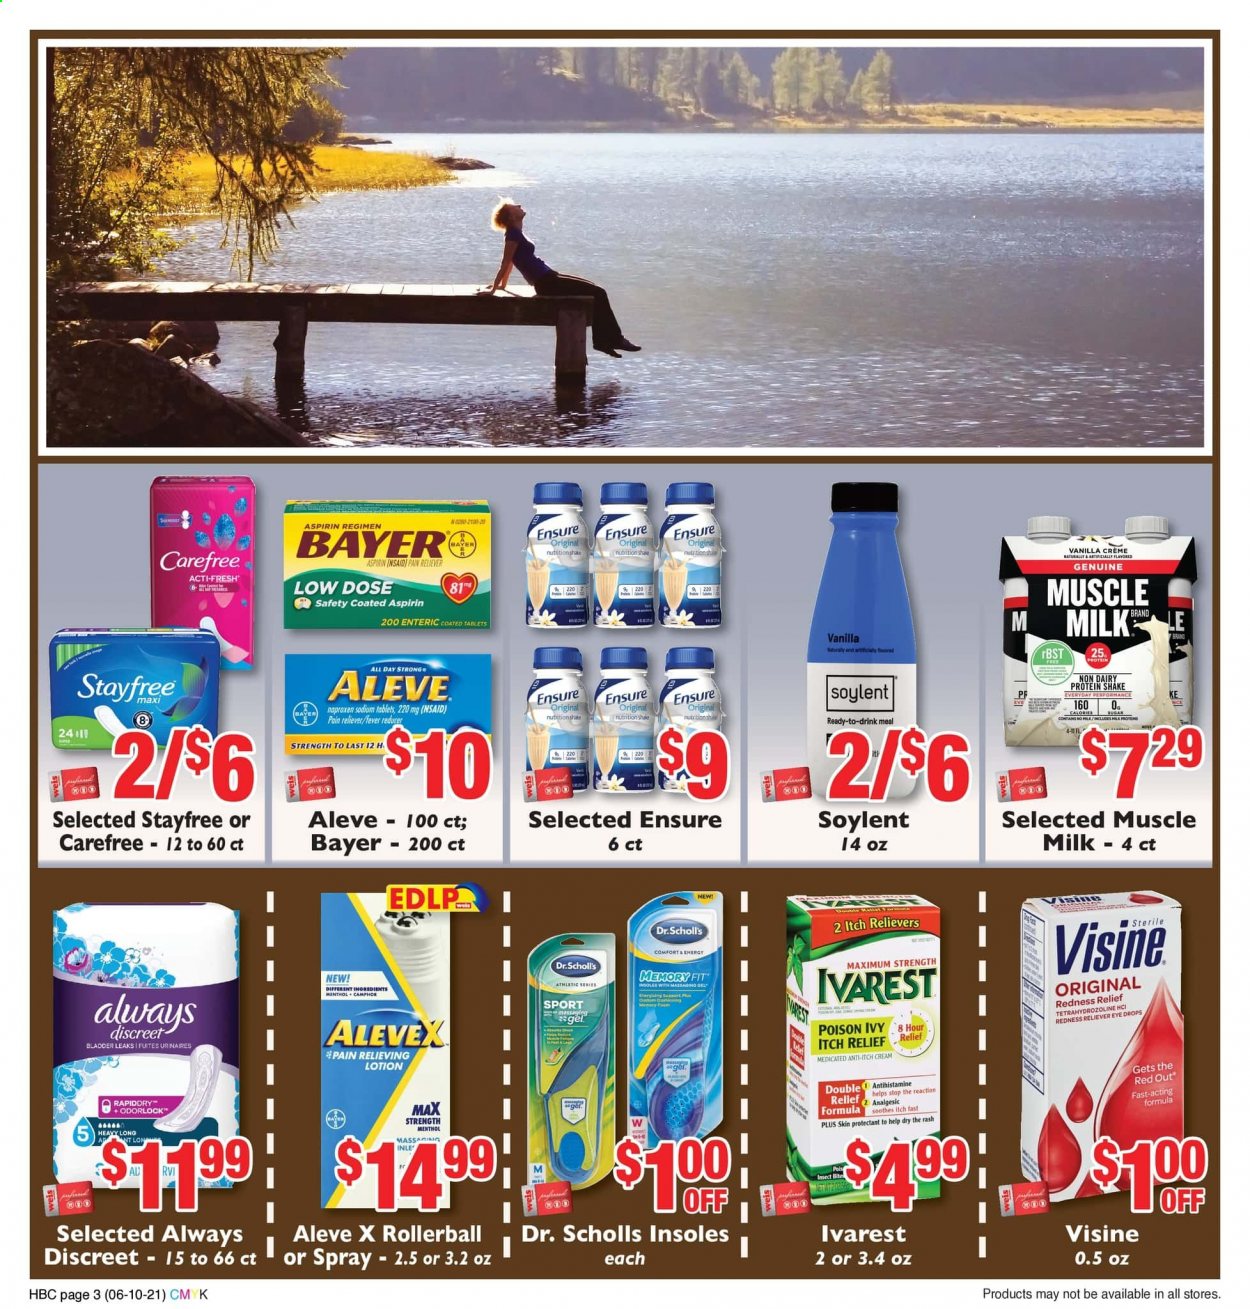 thumbnail - Weis Flyer - 06/10/2021 - 07/15/2021 - Sales products - milk, protein drink, shake, muscle milk, Stayfree, Always Discreet, Carefree, body lotion, Aleve, eye drops, Low Dose, aspirin, Bayer. Page 3.